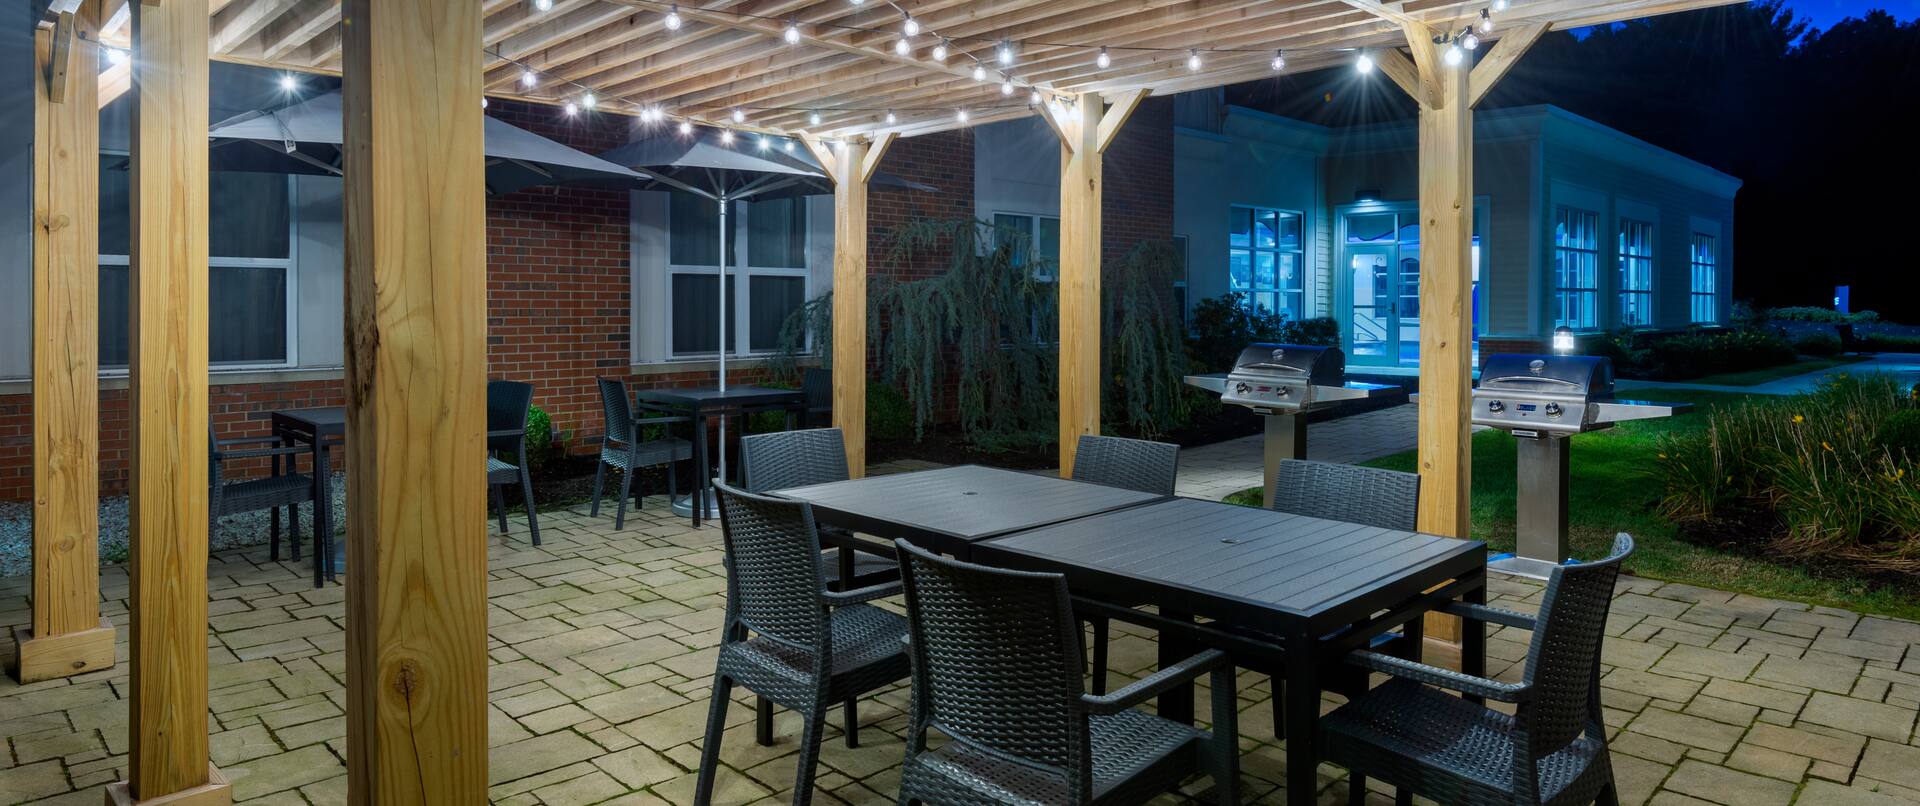 outdoor covered patio, bbq grills, tables and chairs